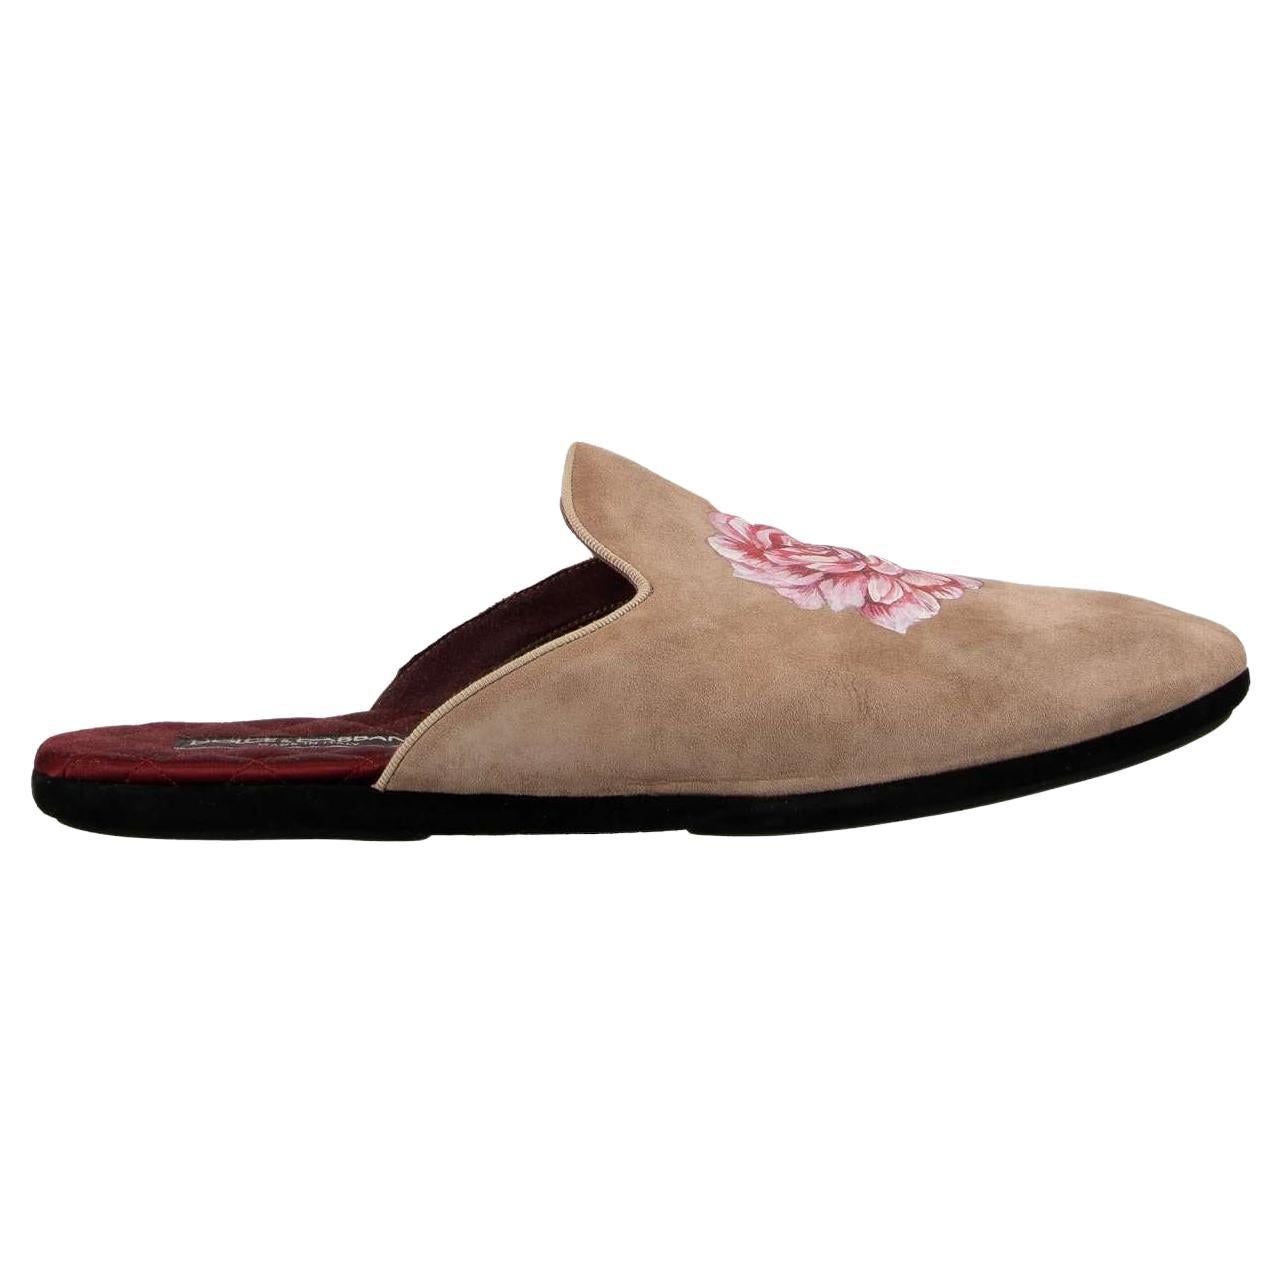 D&G - Rose Painted Suede Shoes Slipper YOUNG POPE Beige 44 UK 10 US 11 For Sale